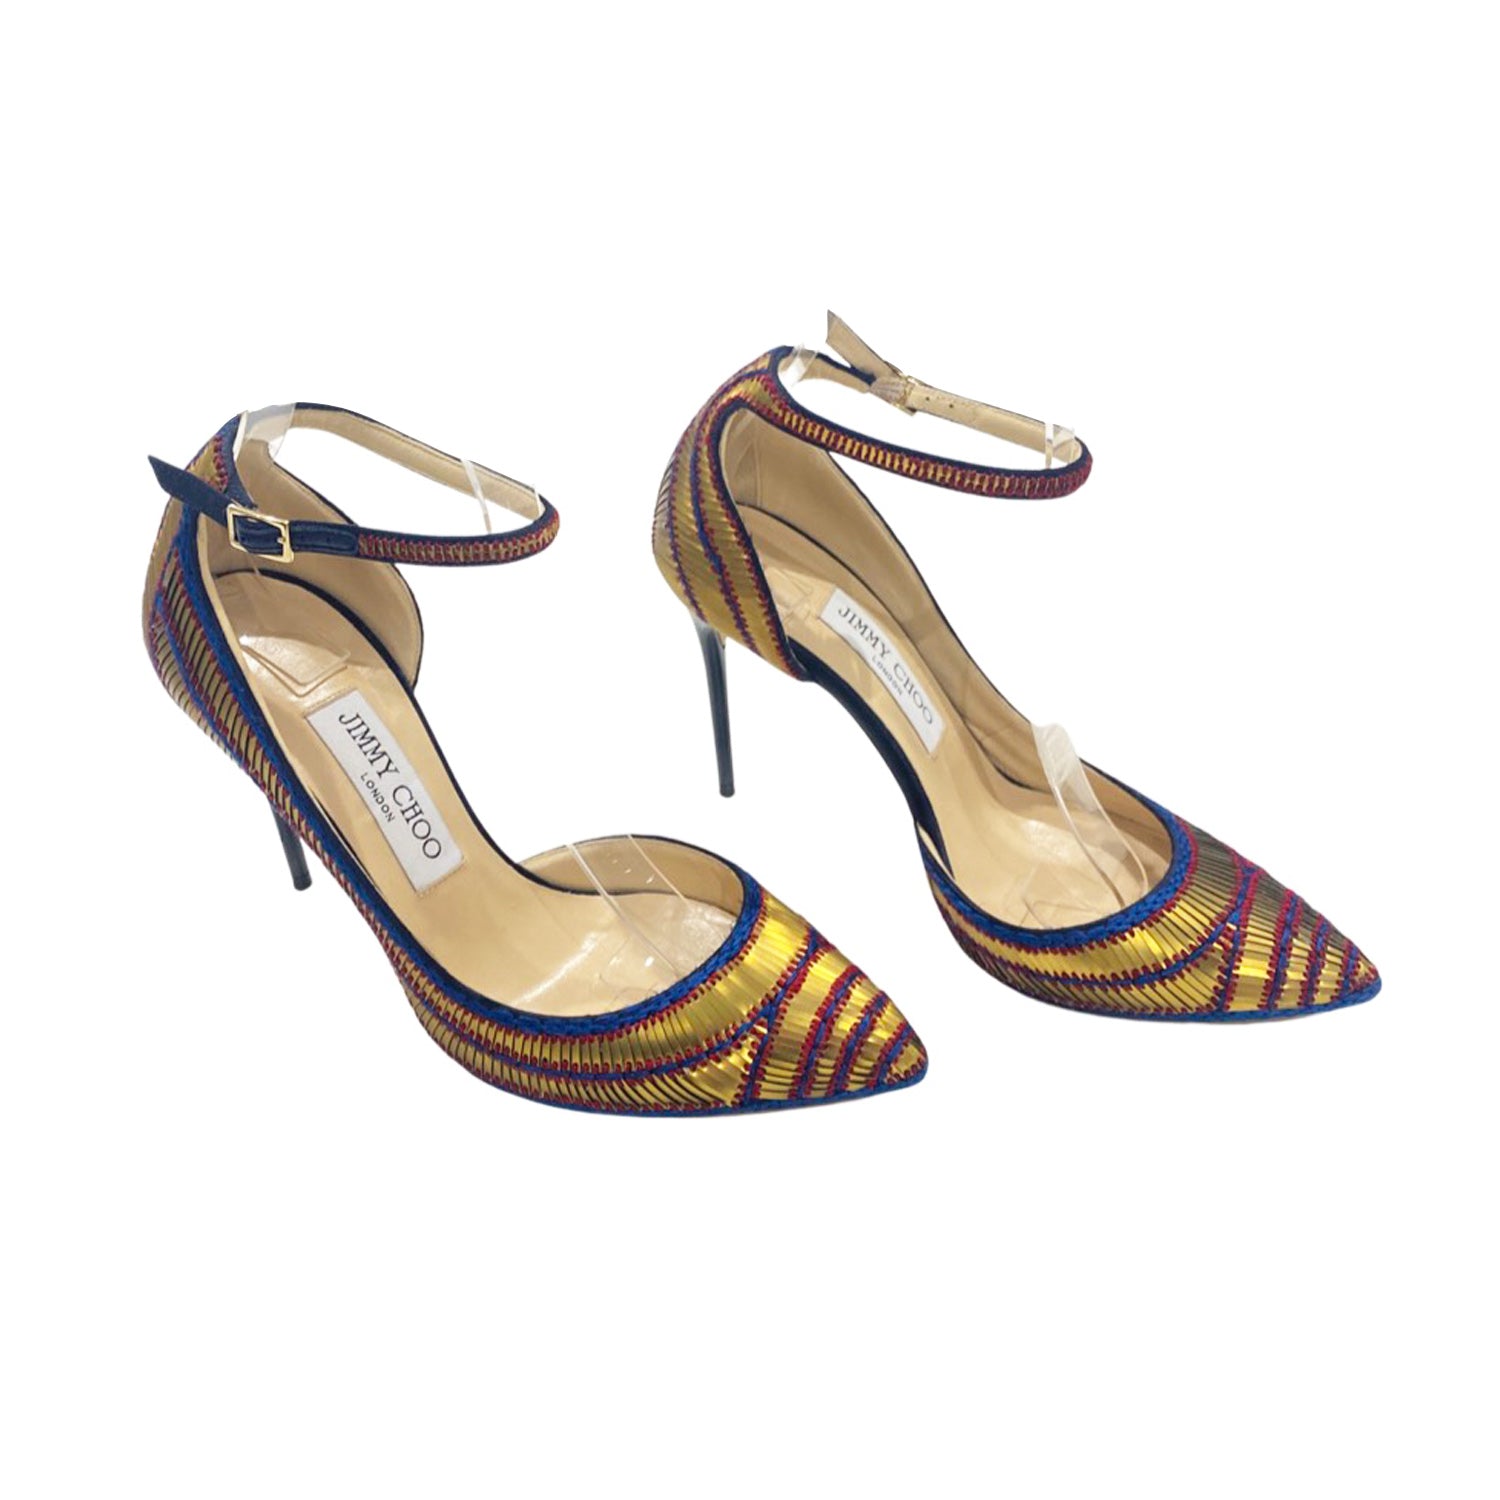 JIMMY CHOO - The LANE heels were made for dancing. In gilt leather, with a  scalloped double ankle strap, they're also seriously flattering—making them  the ideal choice for getting into the groove.